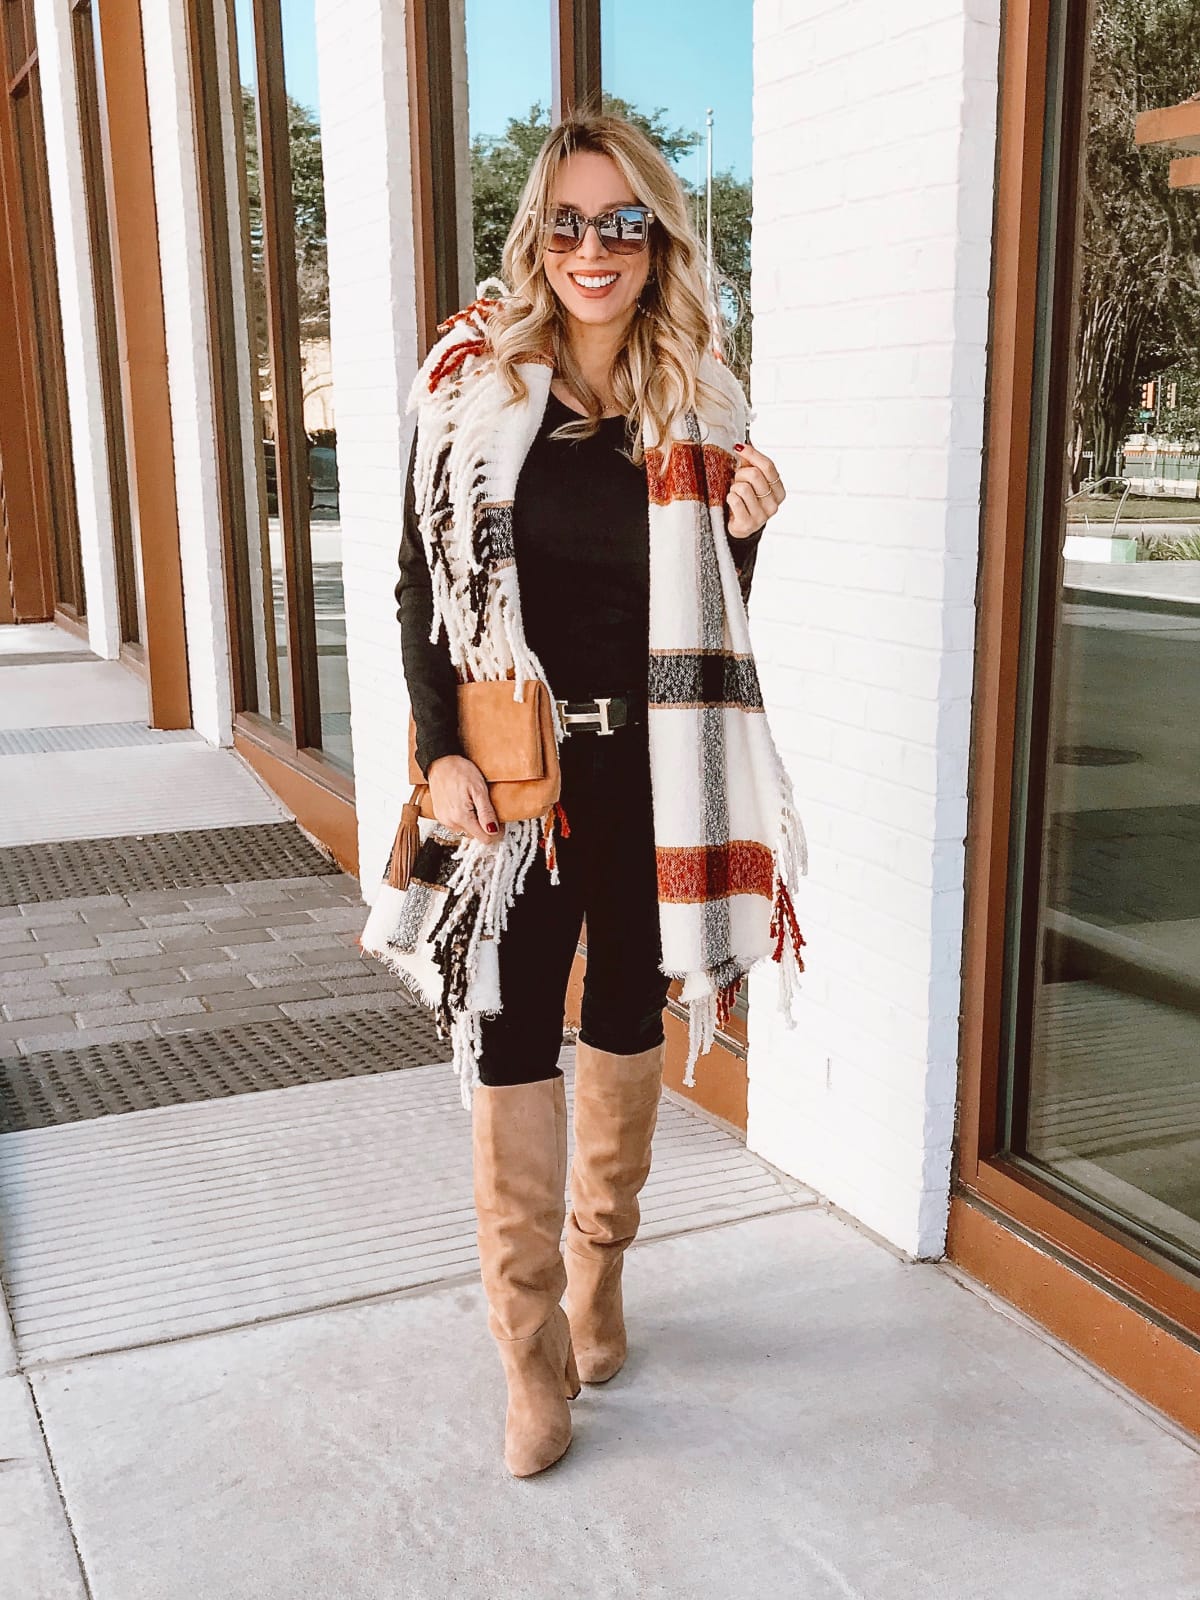 Winter outfit - fringe scarf black jeans and tall boots